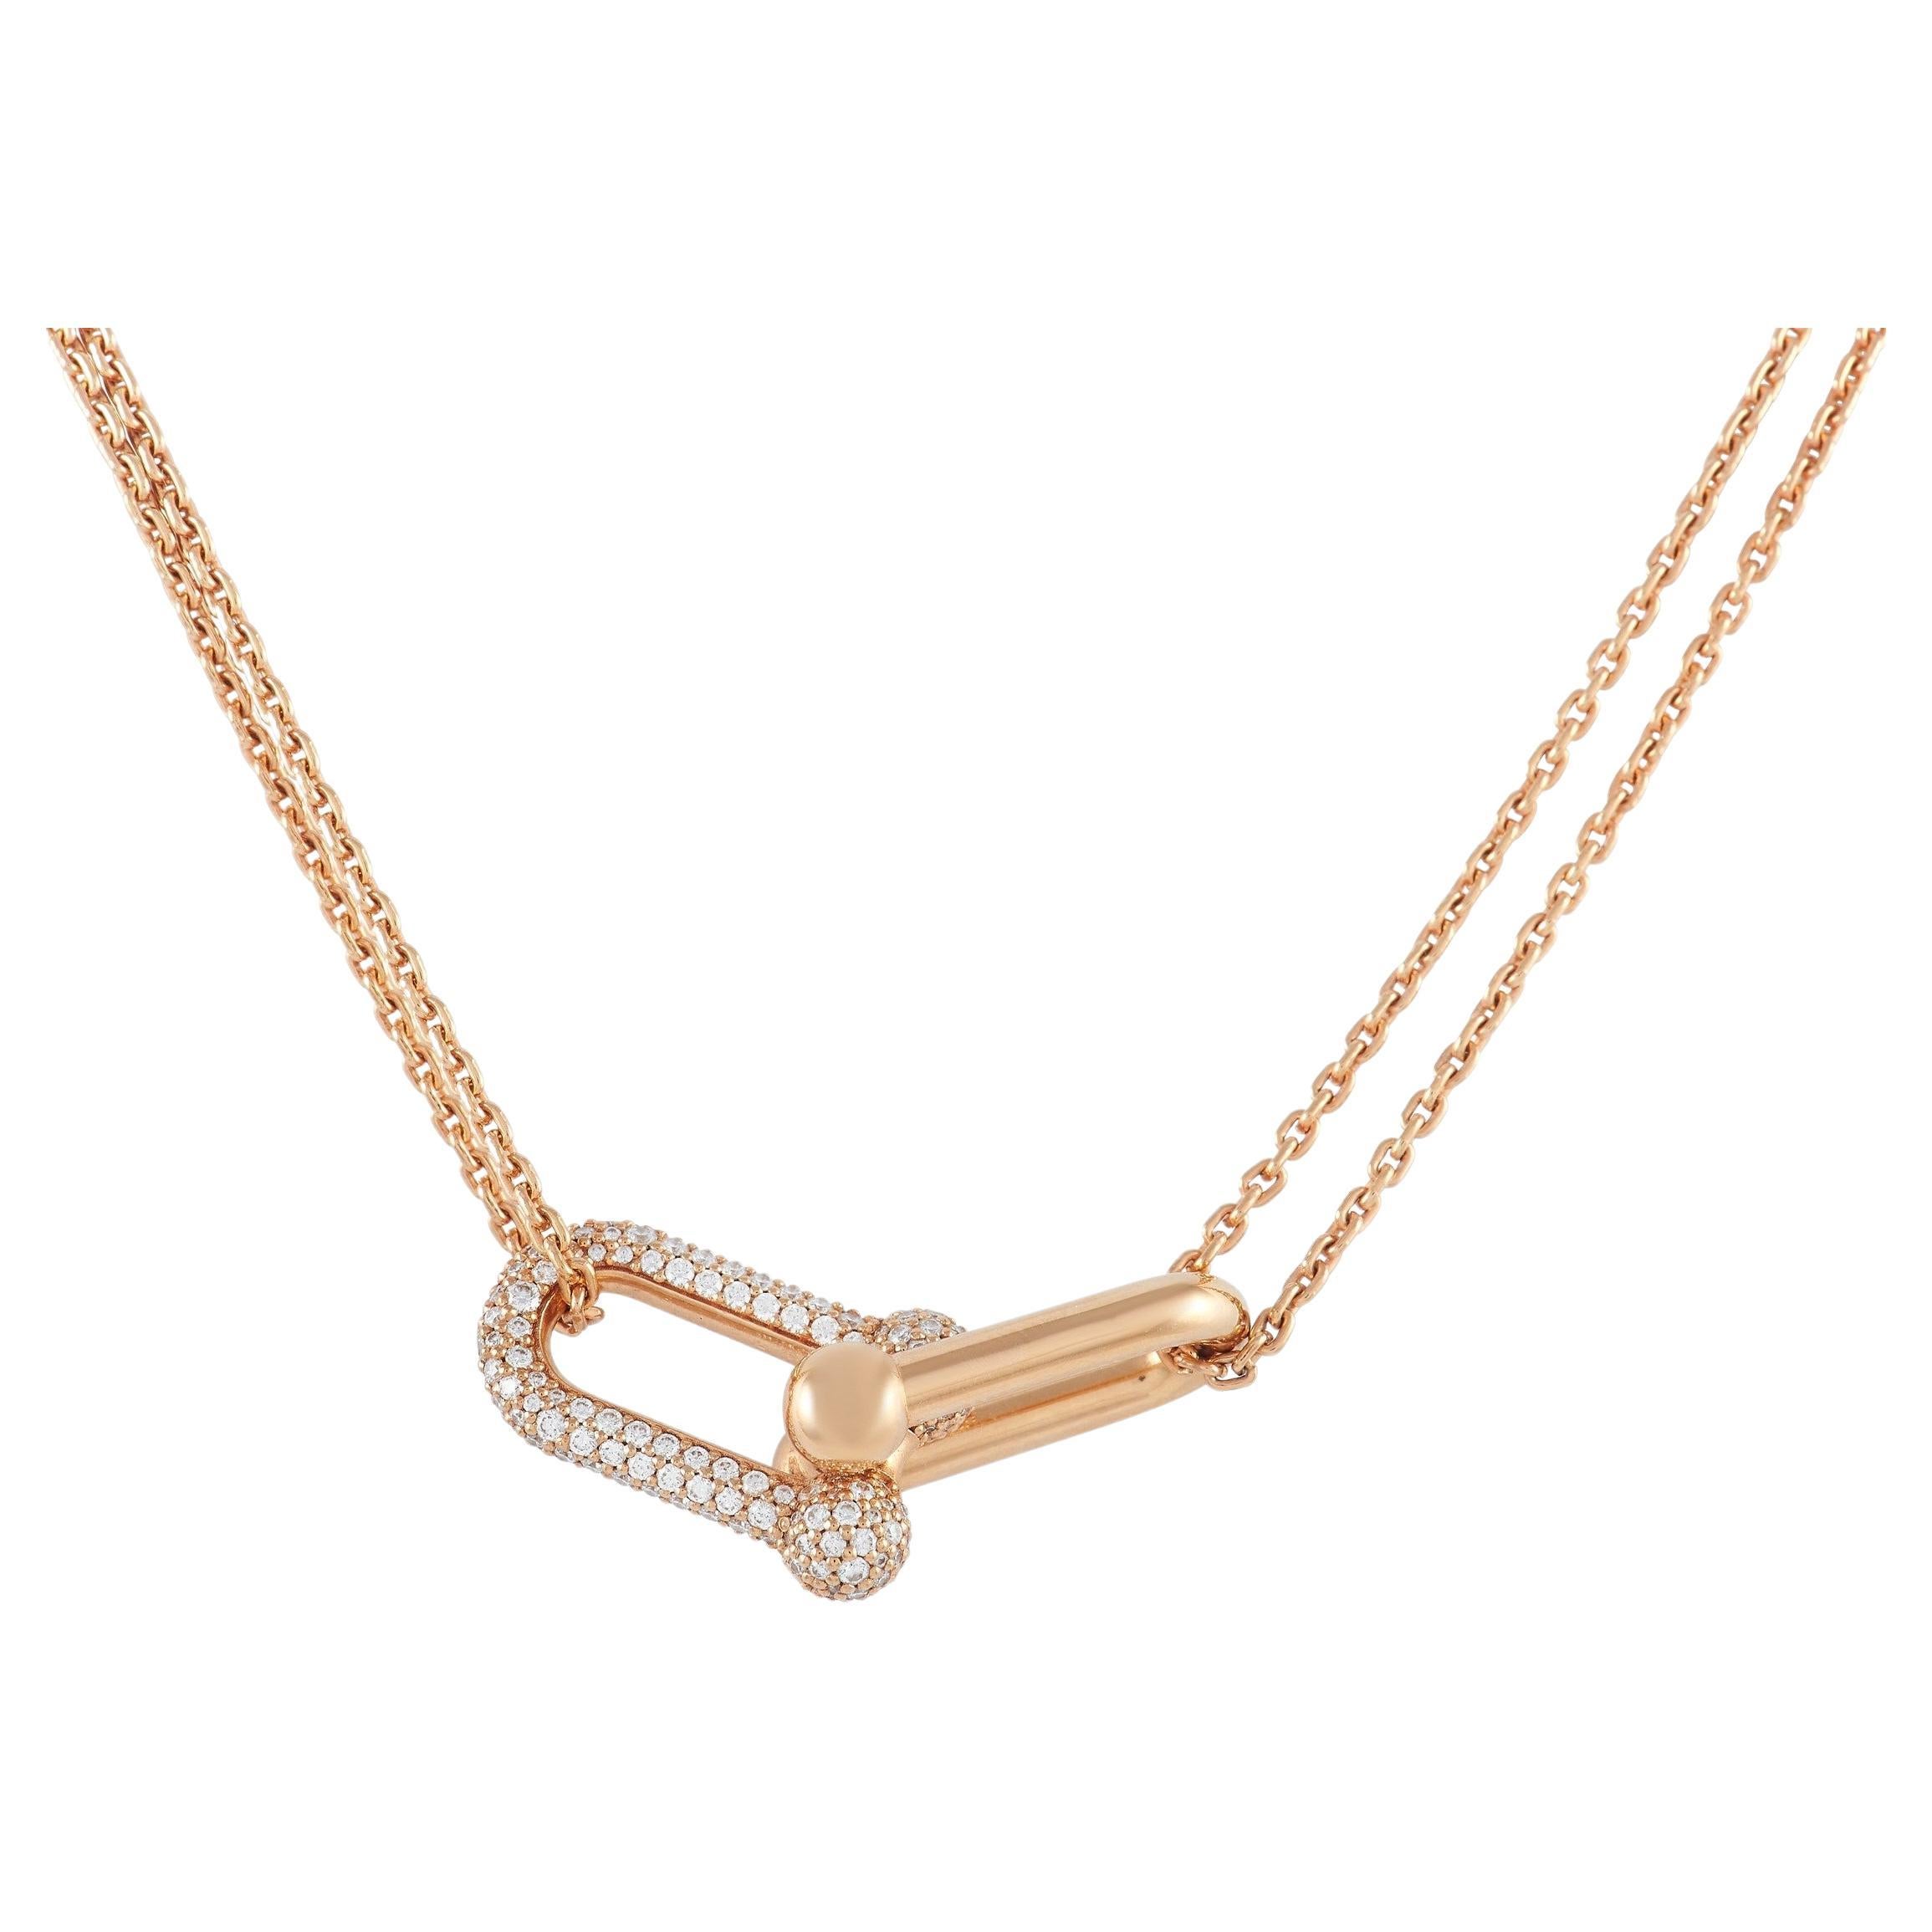 Womens 18k Link Necklace Hardware Chain Necklace Hardware Link Necklace